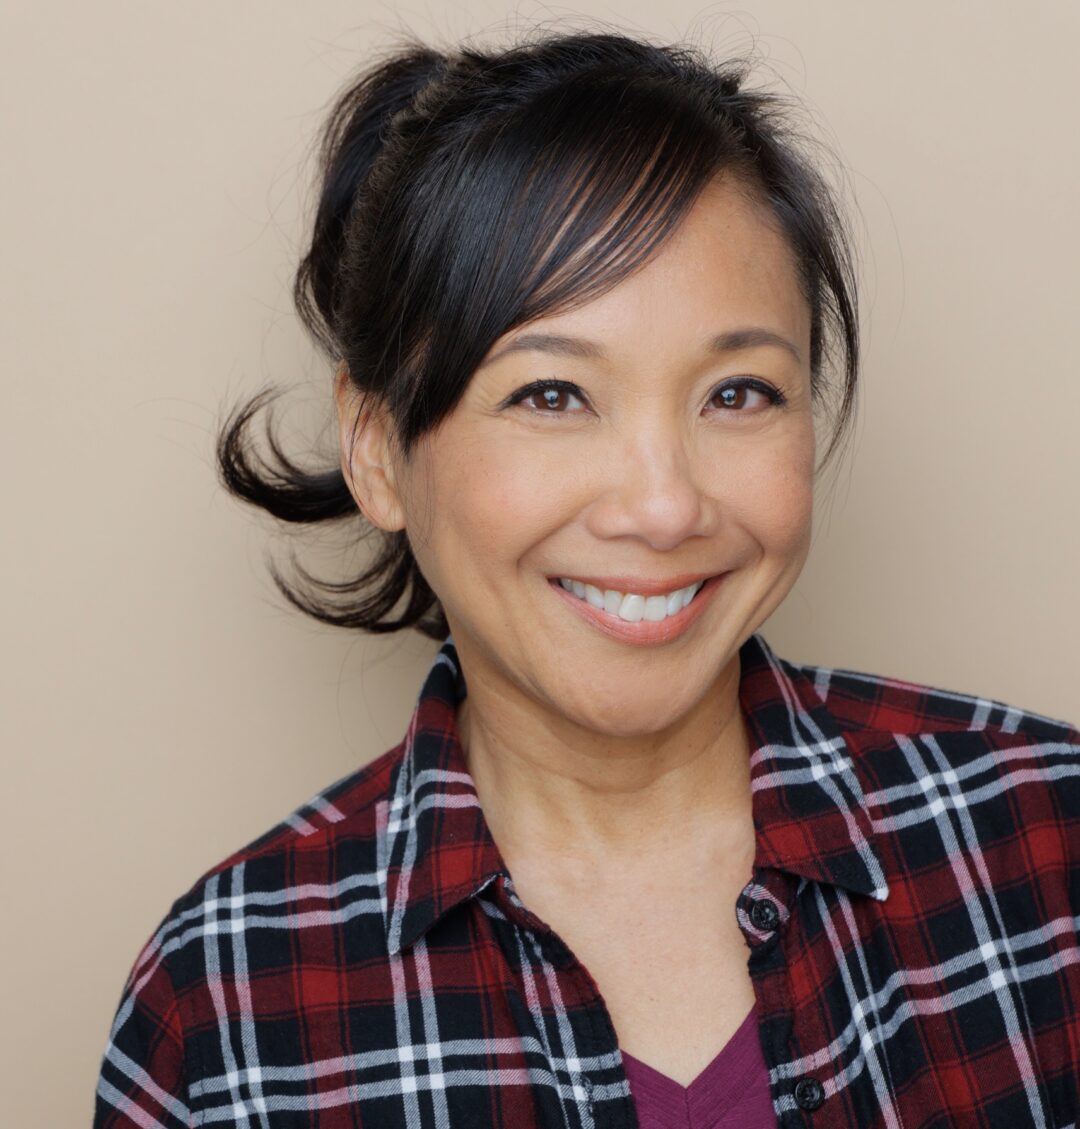 Jennifer Aquino smiling and wearing a red and black plaid shirt over a purple t-shirt.